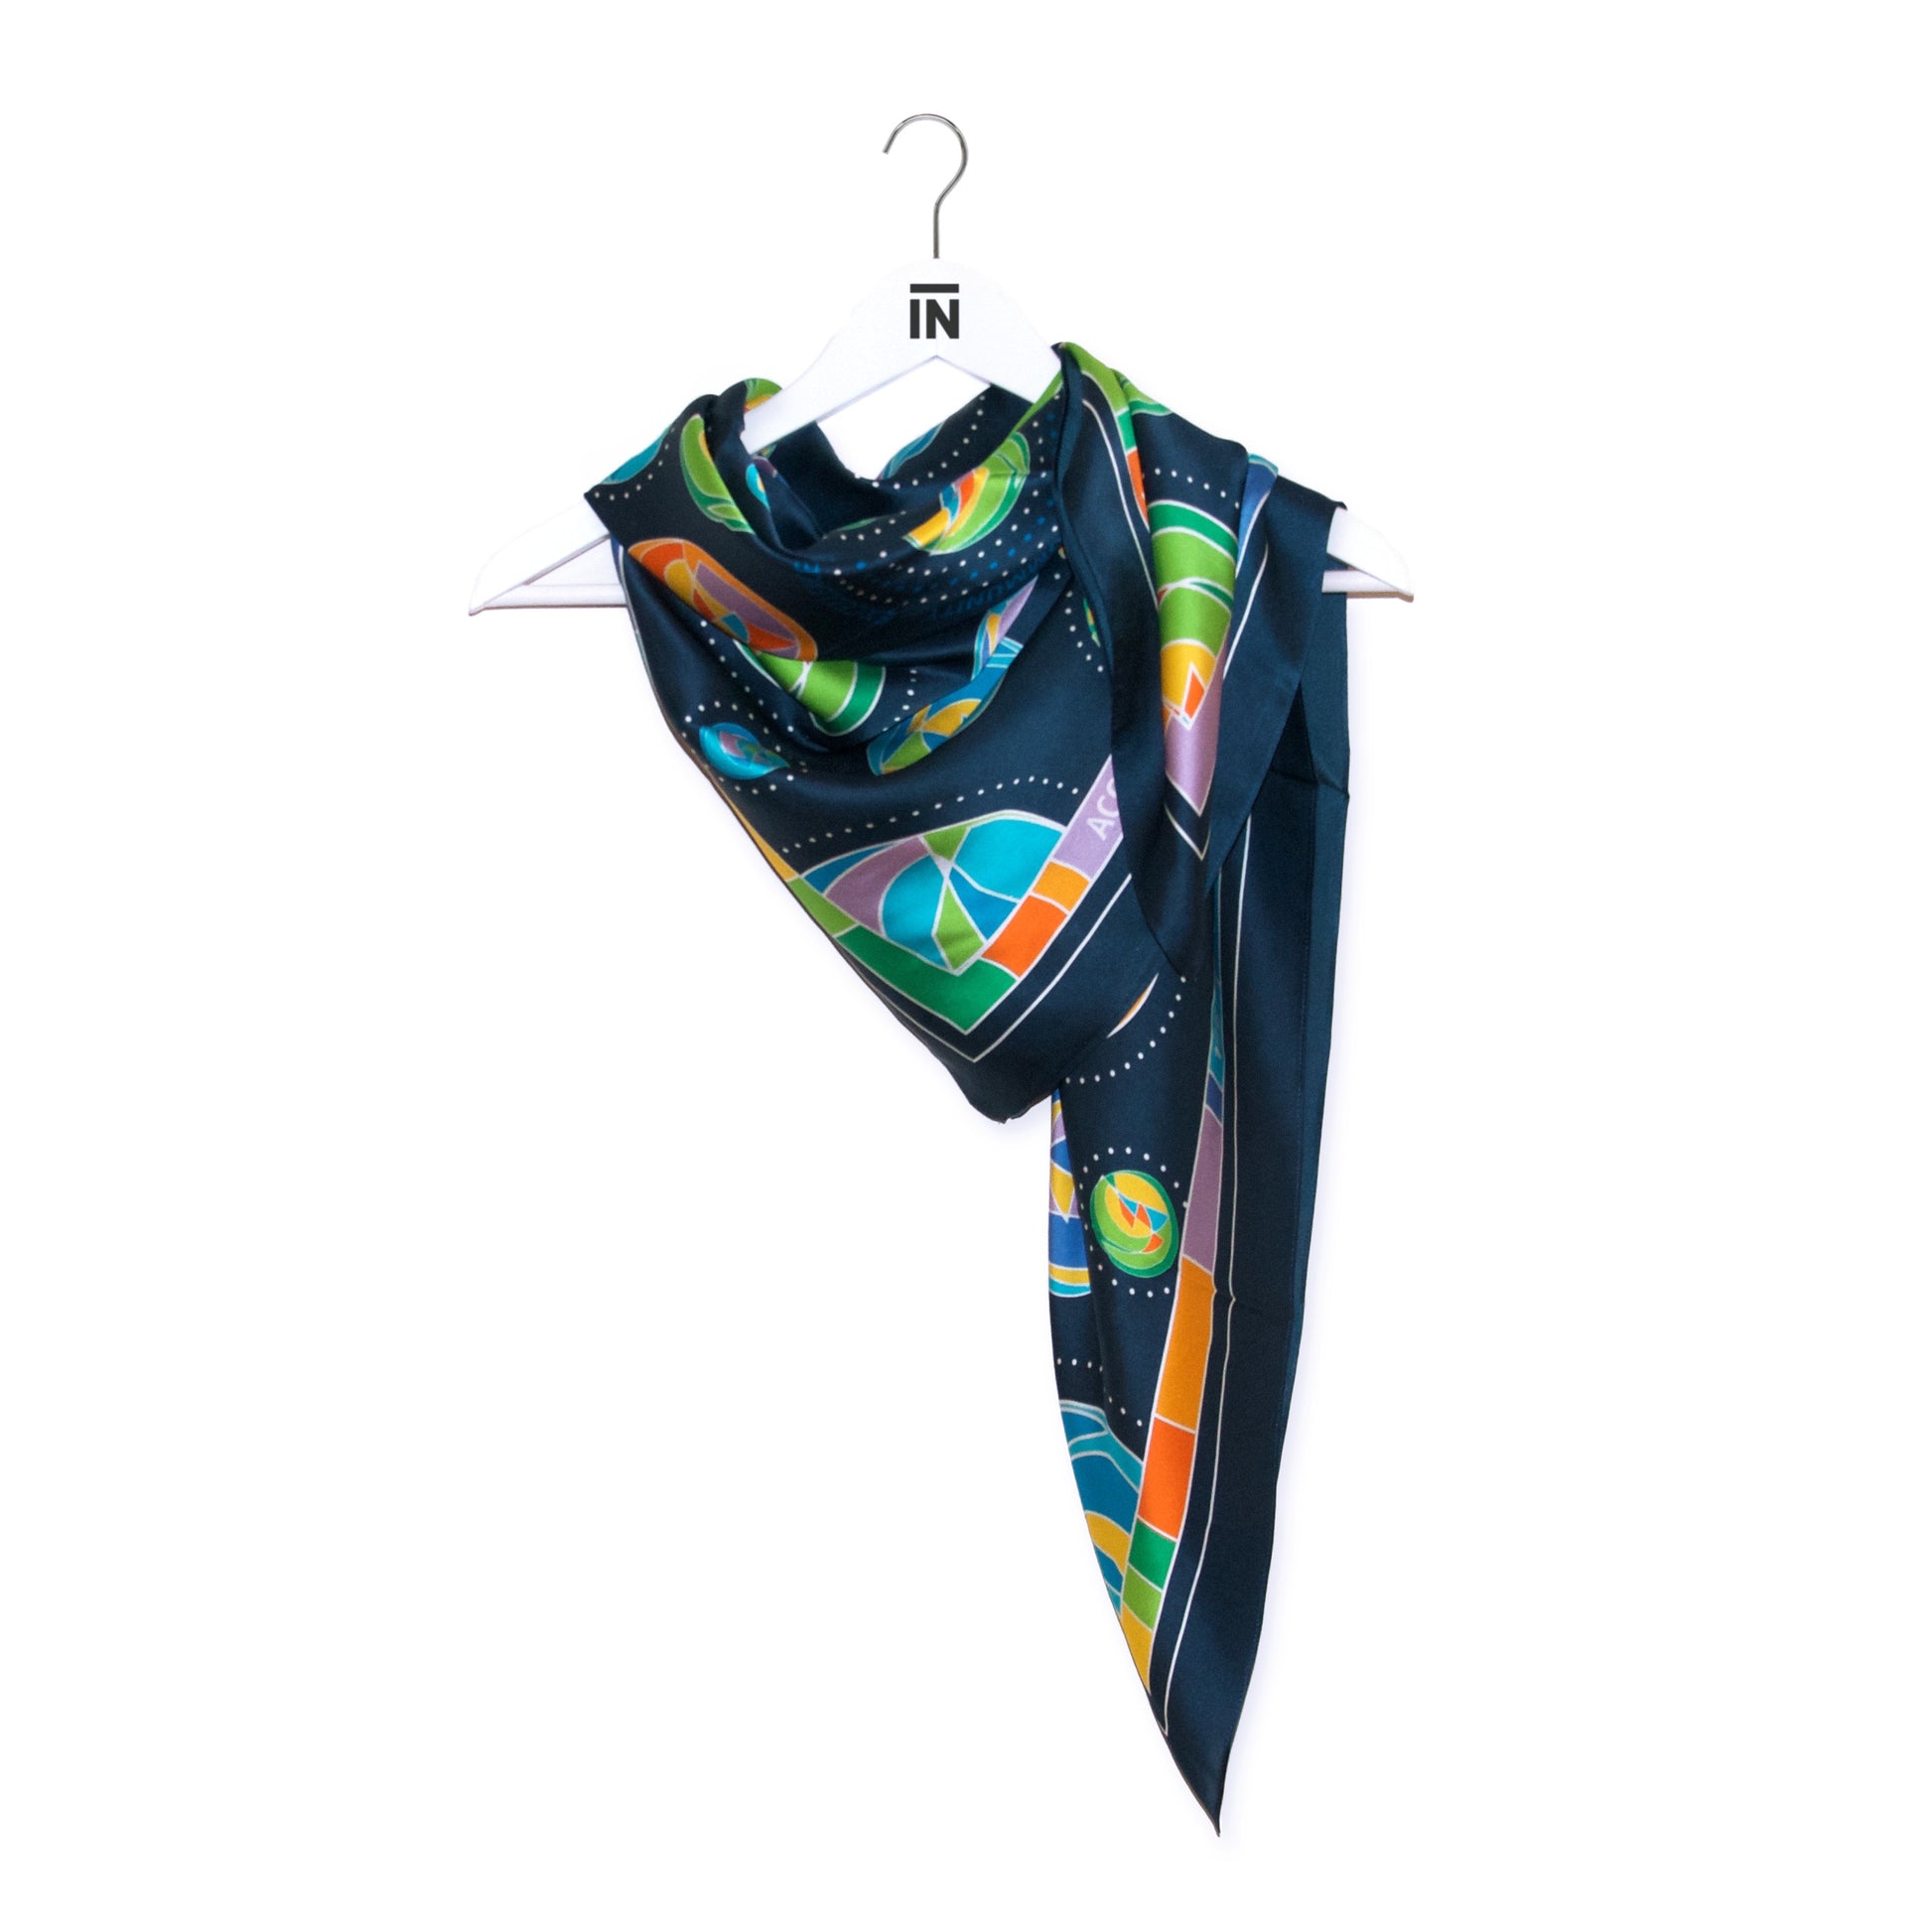 40" x 40" 100% silk George Brown College navy scarf with various shapes and patterns in yellow, green, orange, purple and blue